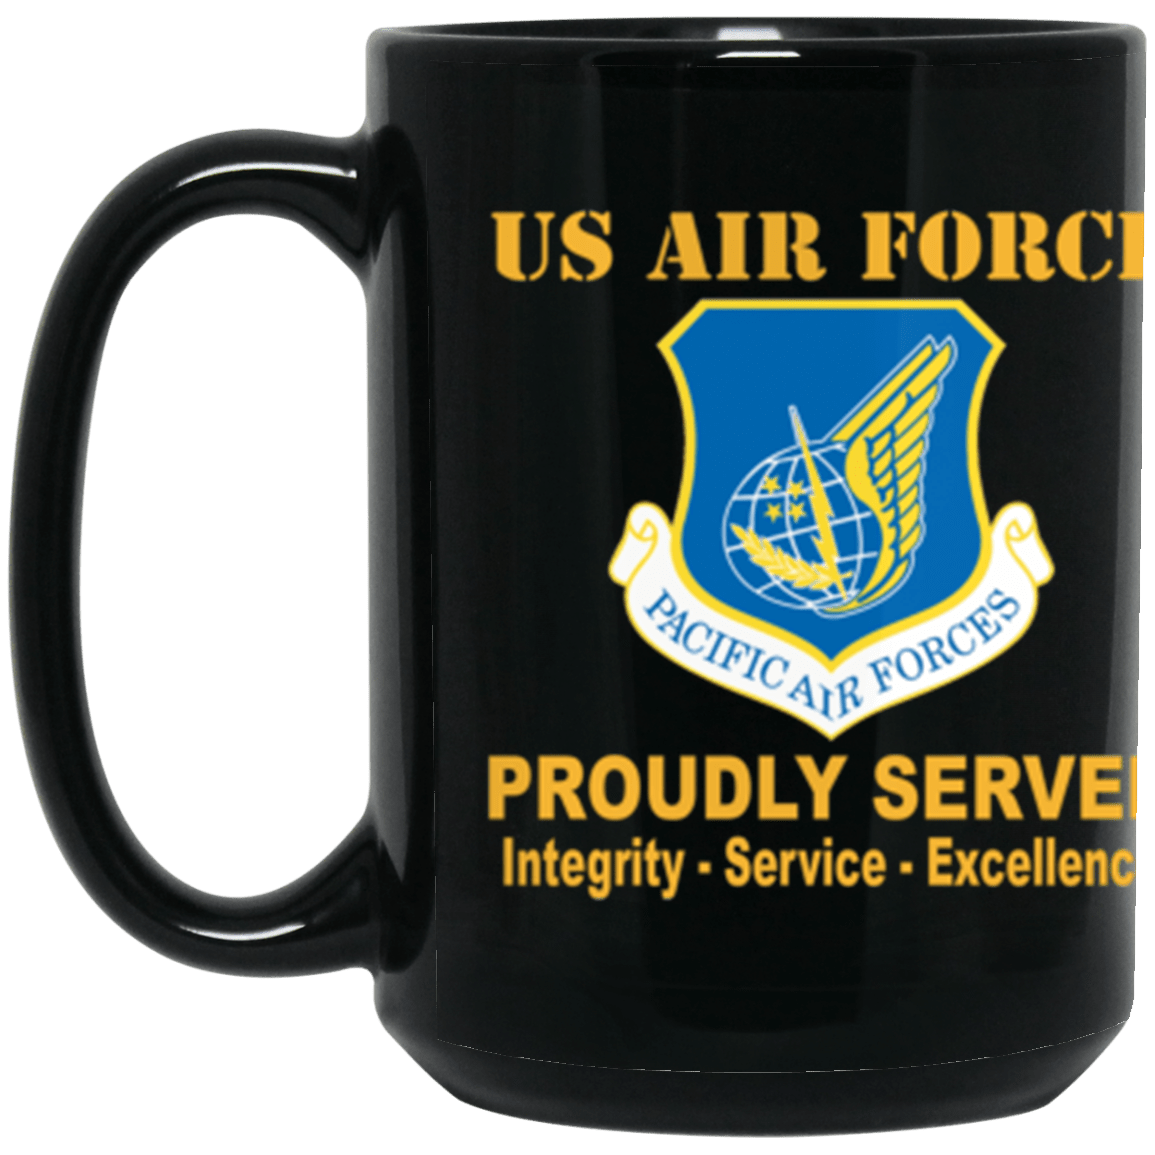 US Air Force Pacific Air Forces Proudly Served Core Values 15 oz. Black Mug-Drinkware-Veterans Nation